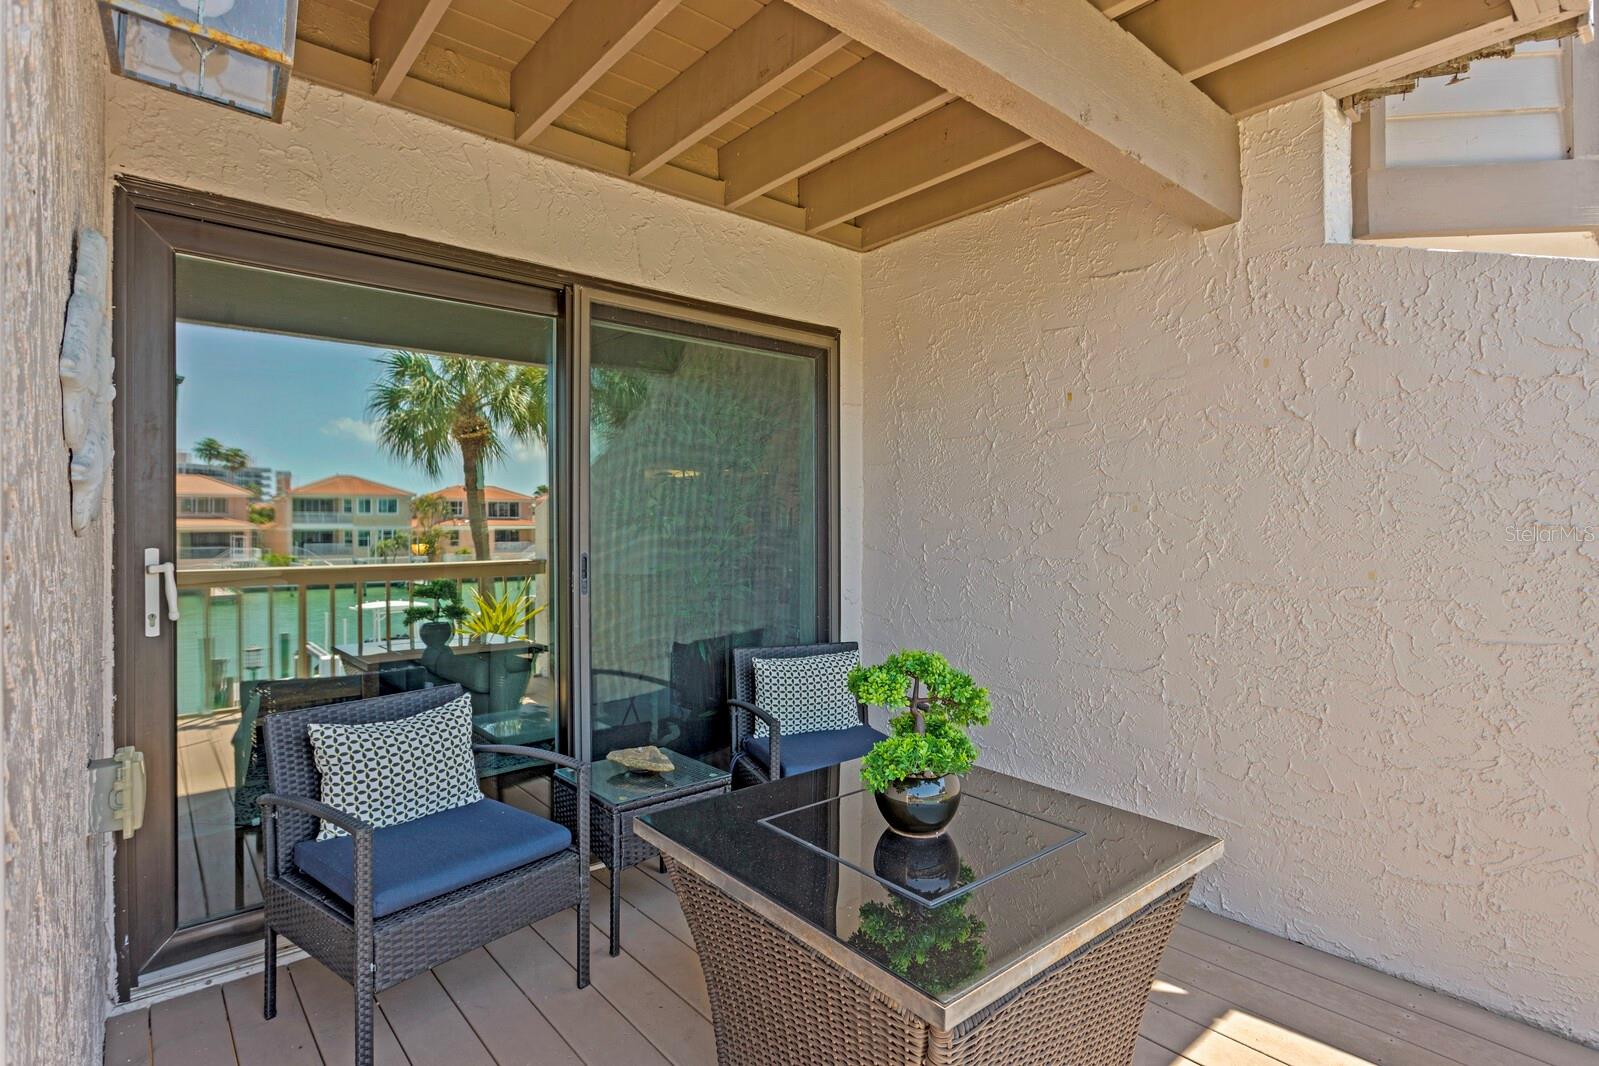 Photo 50 of 81 of 125 MARINA DEL REY COURT townhome